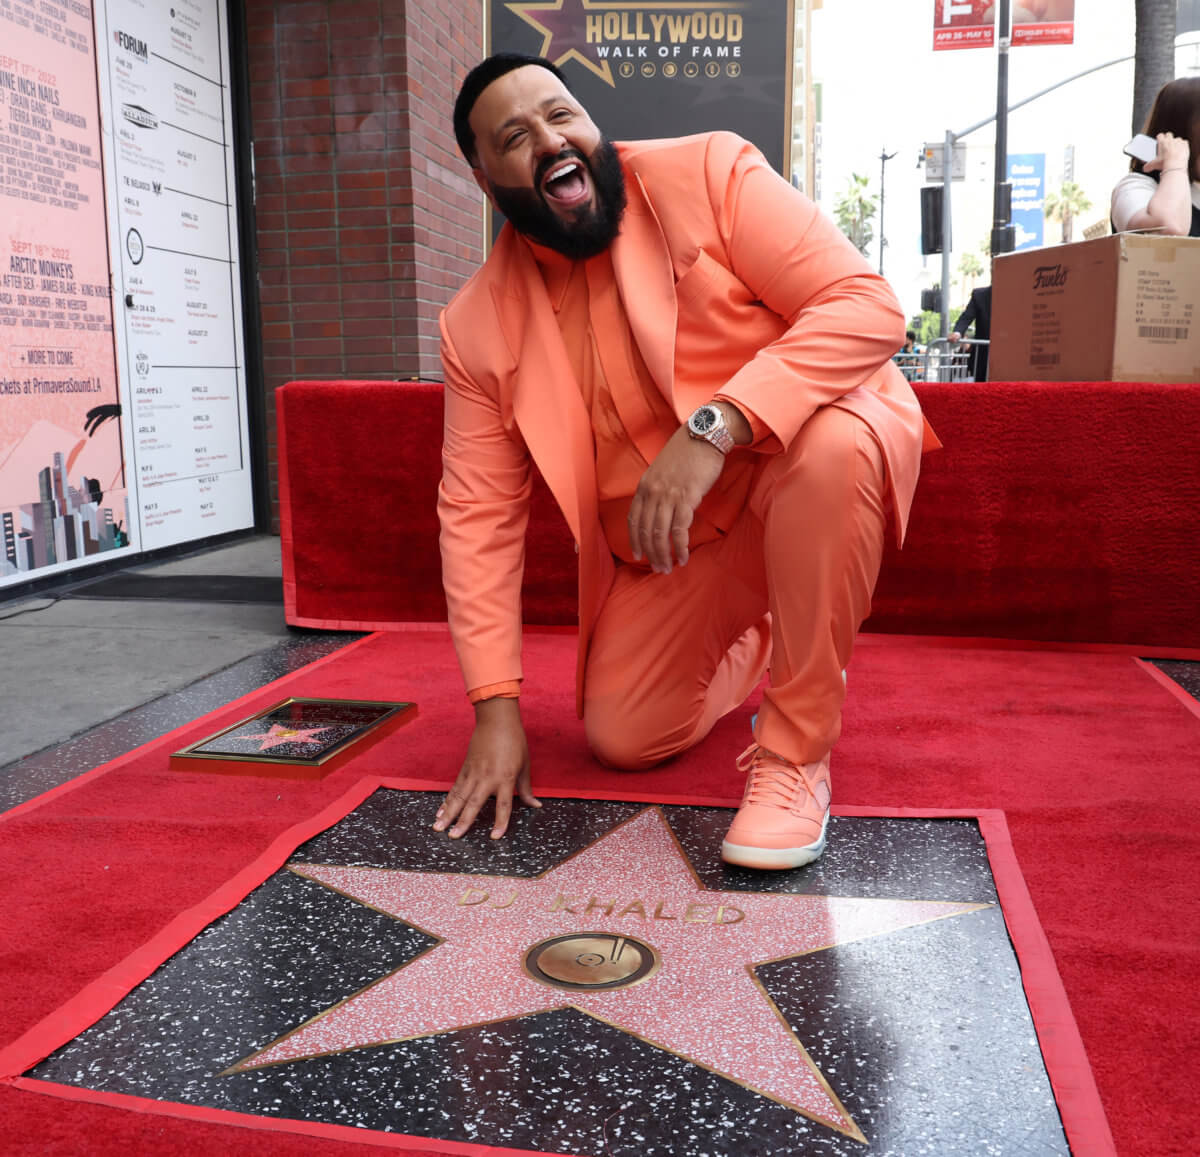 DJ Khaled unveils his star on the Hollywood Walk of Fame in Los Angeles